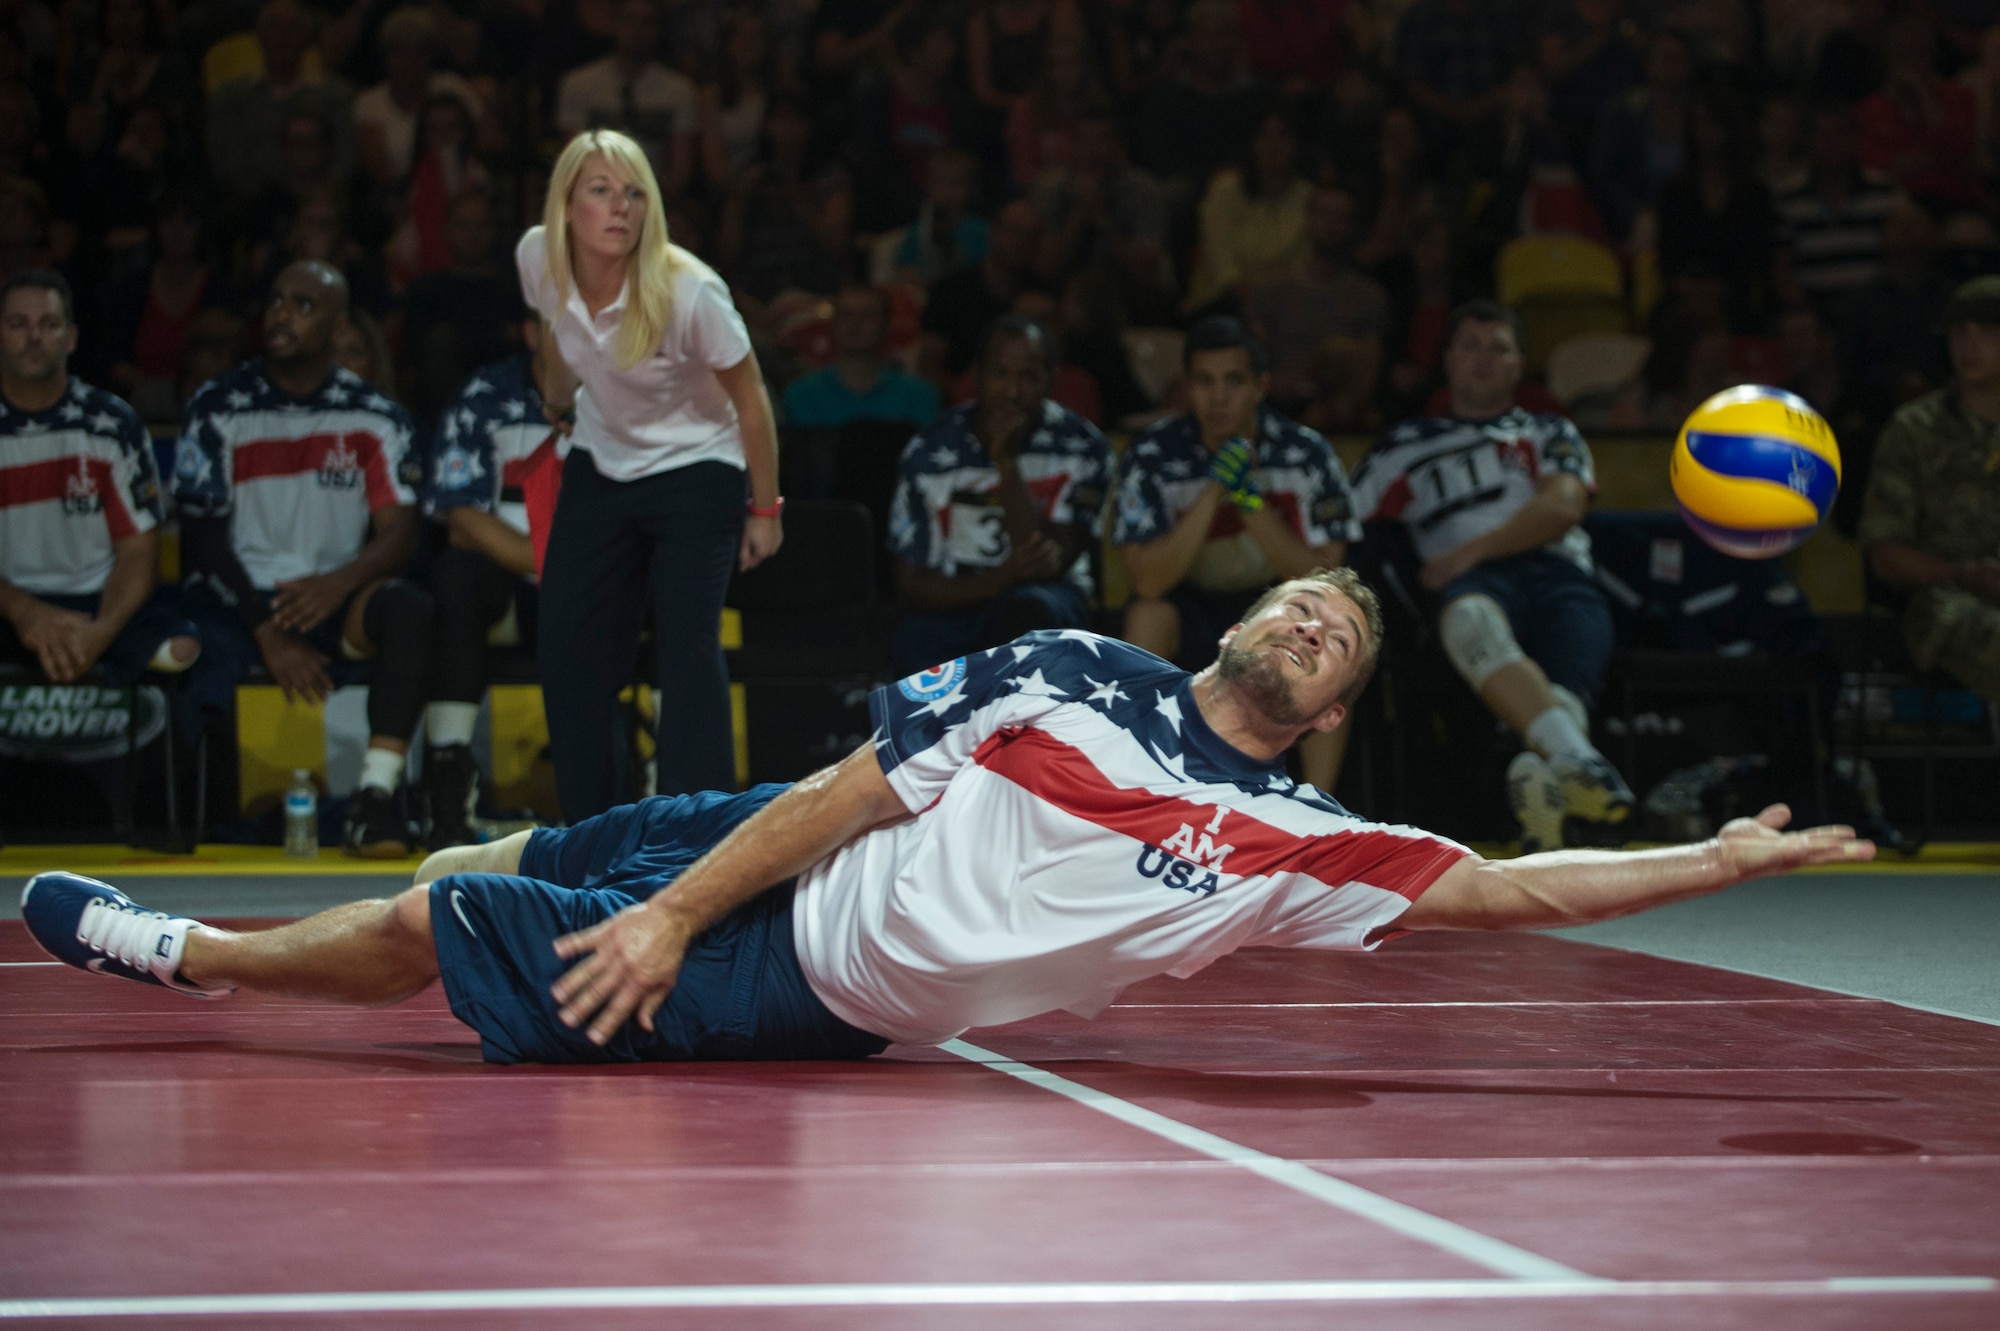 Navy Hospital Corpsman 2nd Class Max Rohn reaches for the ball during the sitting volleyball finals at the inaugural Invictus Games Sept. 14, 2014, in London. Great Britain defeated the U.S. in a best-out-of-five match. The Invictus Games featured athletes competing in various Paralympic-style events, including swimming, track and field, seated volleyball, wheelchair basketball, and wheelchair rugby, among others. (U.S. Navy photo/Mass Communication Specialist 1st Class (SW) Mark Logico)
